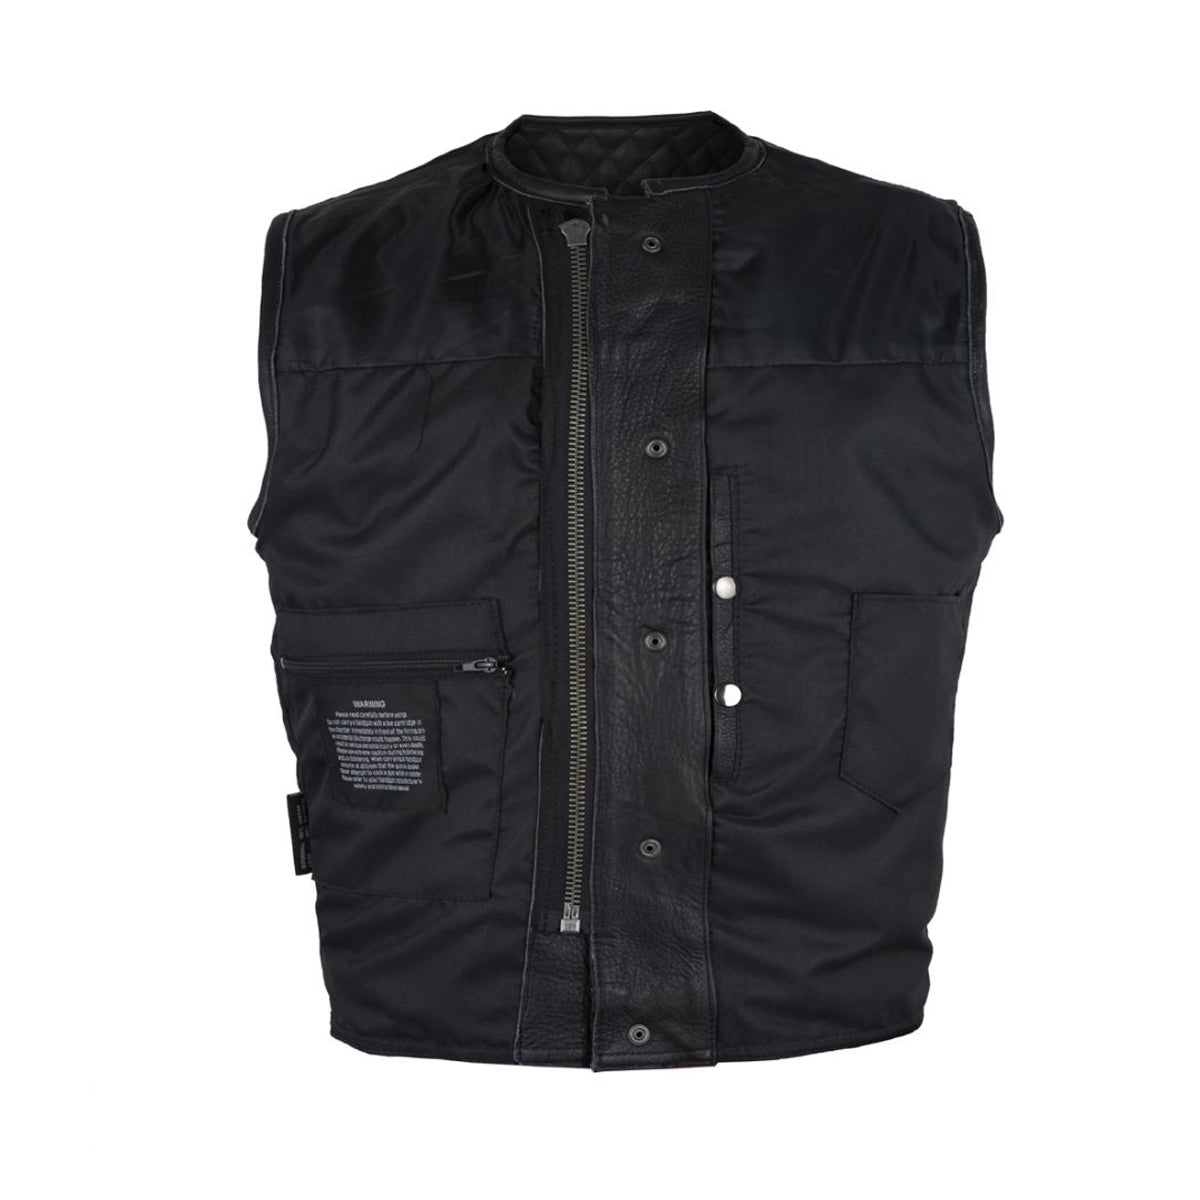 Men's Zippered 1/2" Collar Motorcycle Club Vest with Diamond Padding on Shoulder